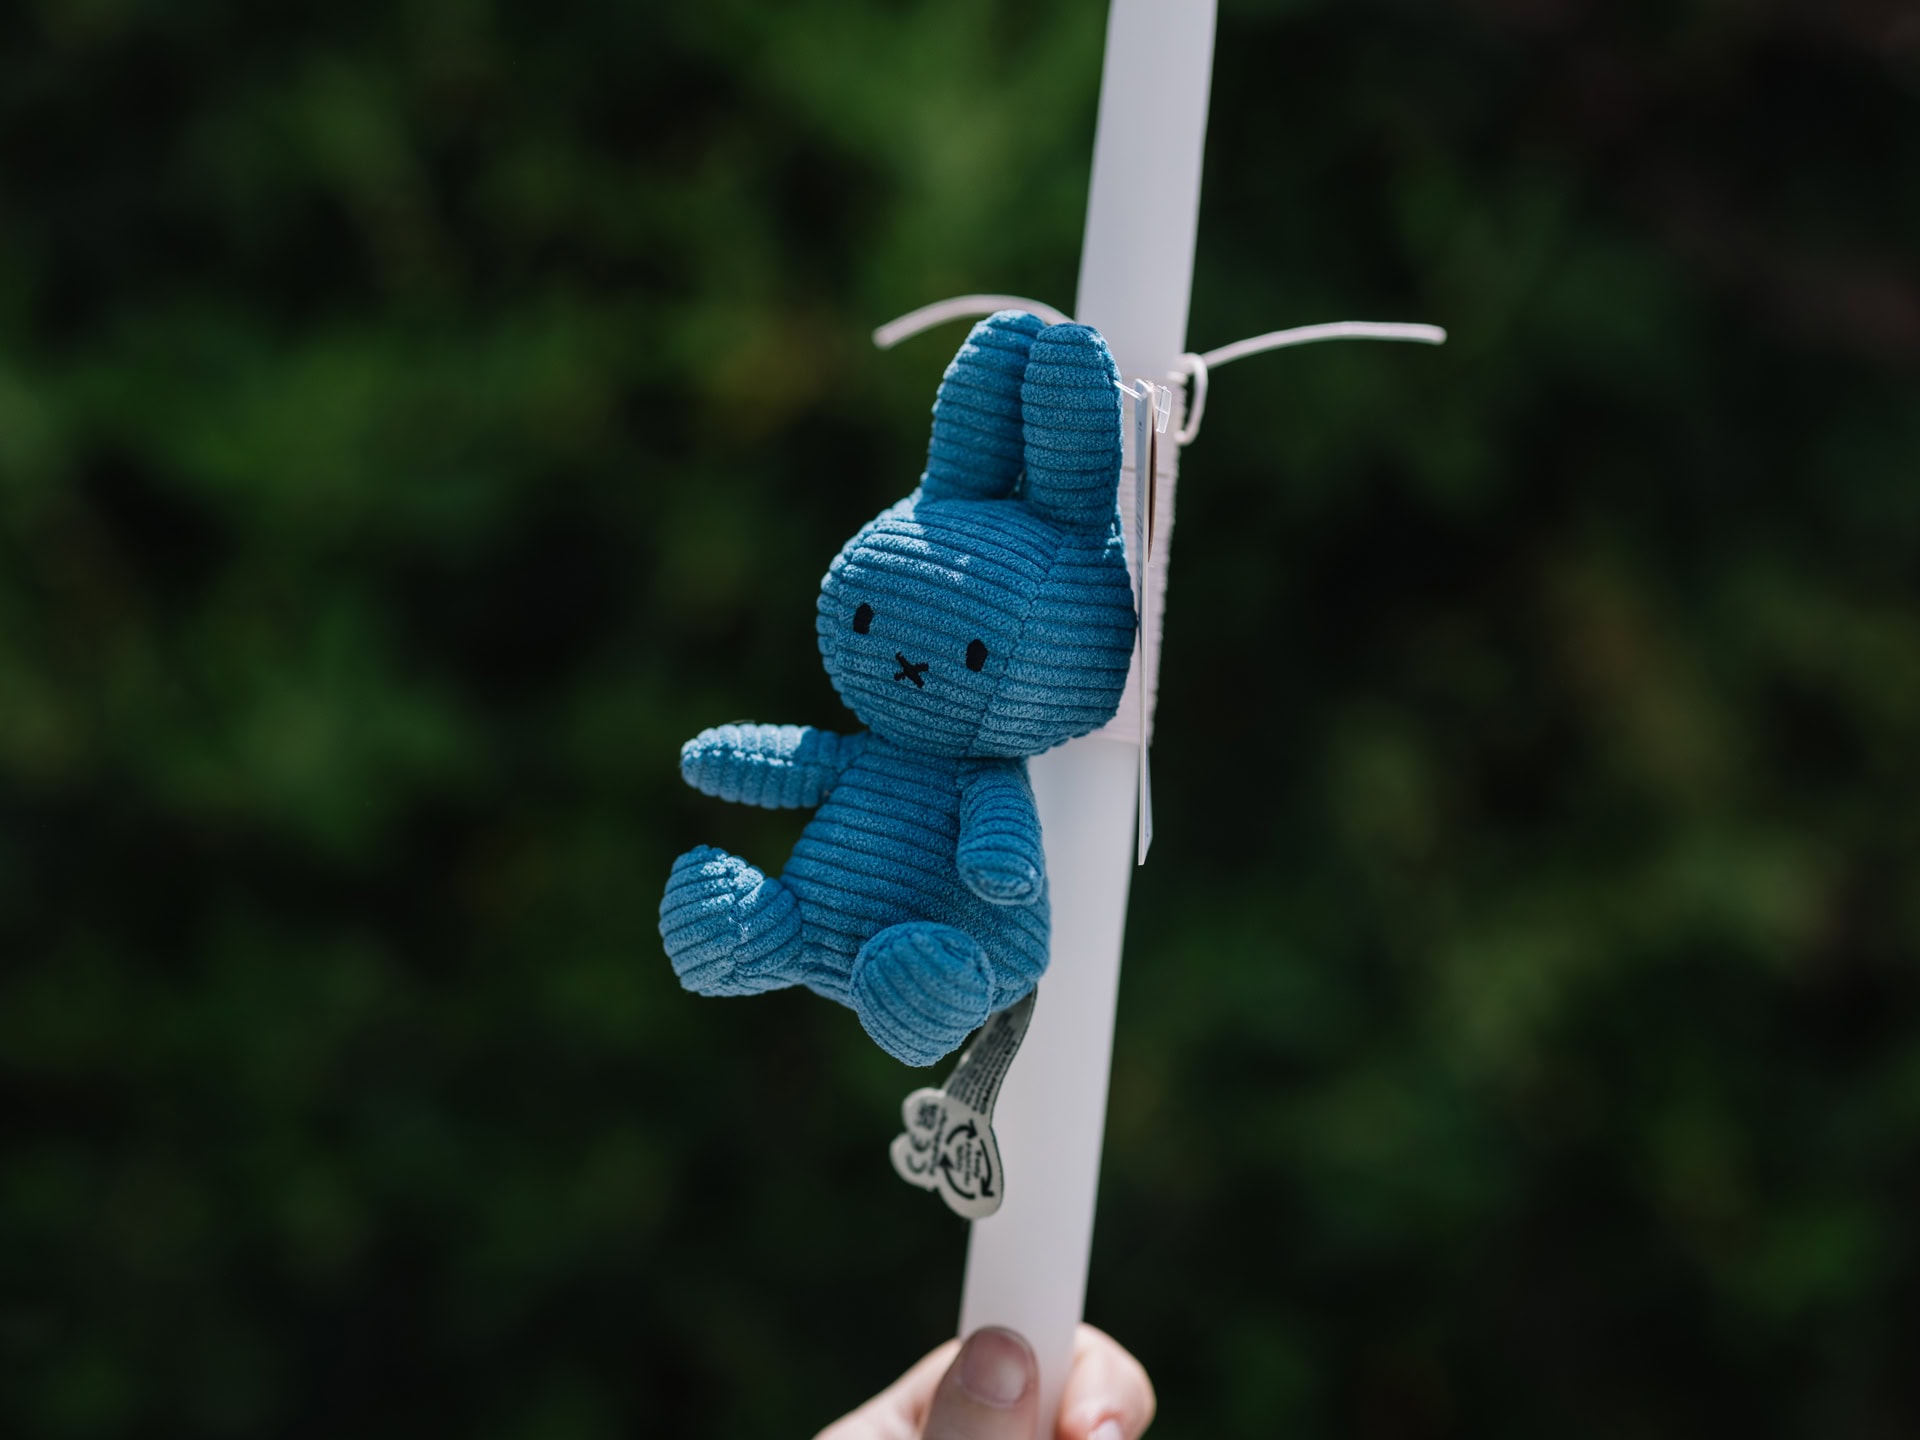 Candle with a blue stuffed bunny key chain.